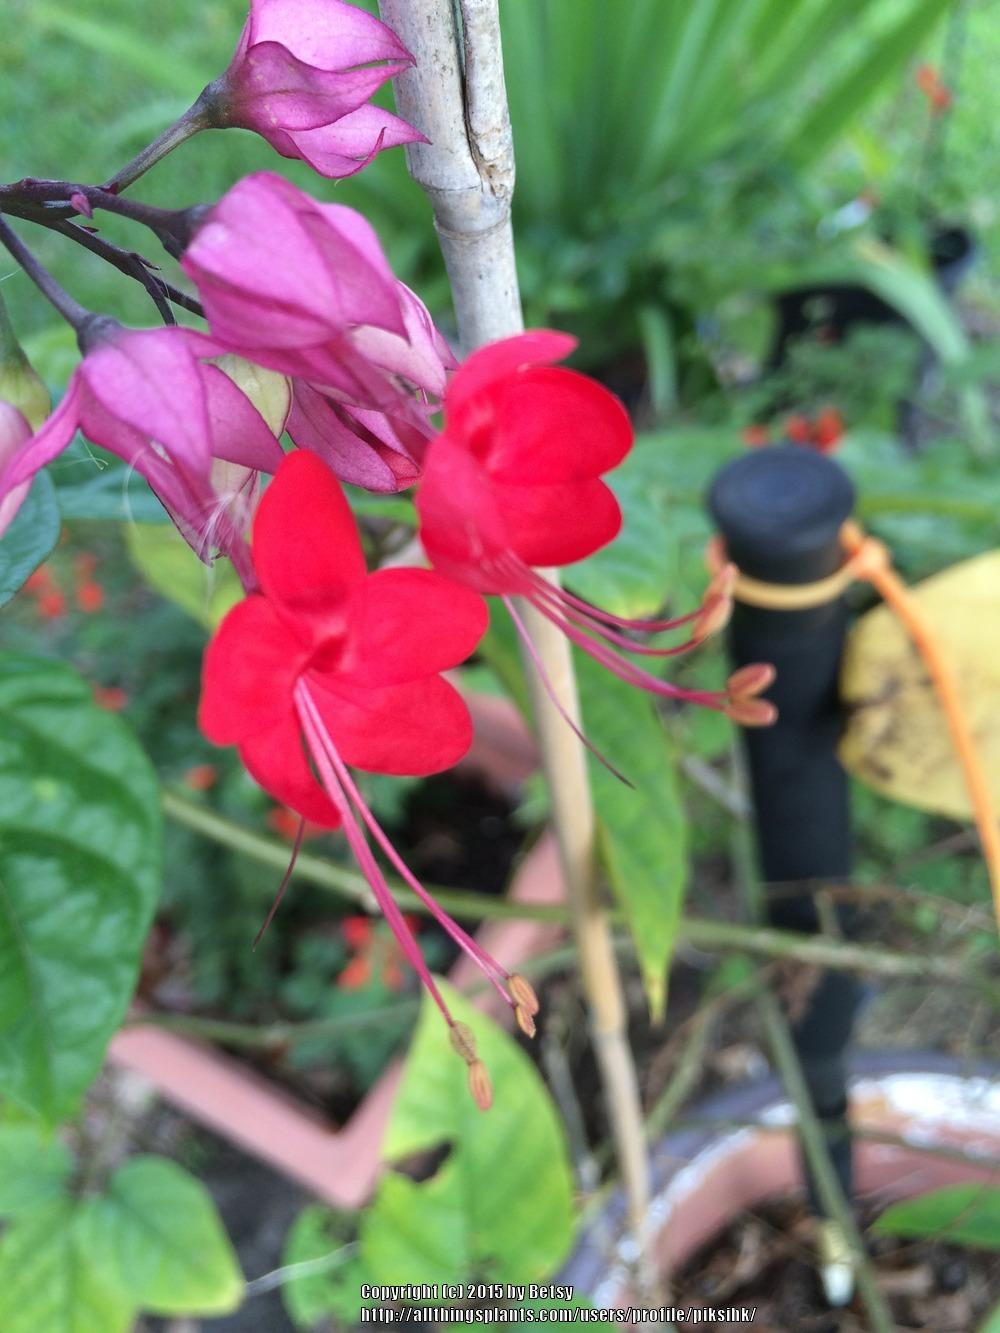 Photo of Bleeding Heart Vine (Clerodendrum thomsoniae 'Delectum') uploaded by piksihk